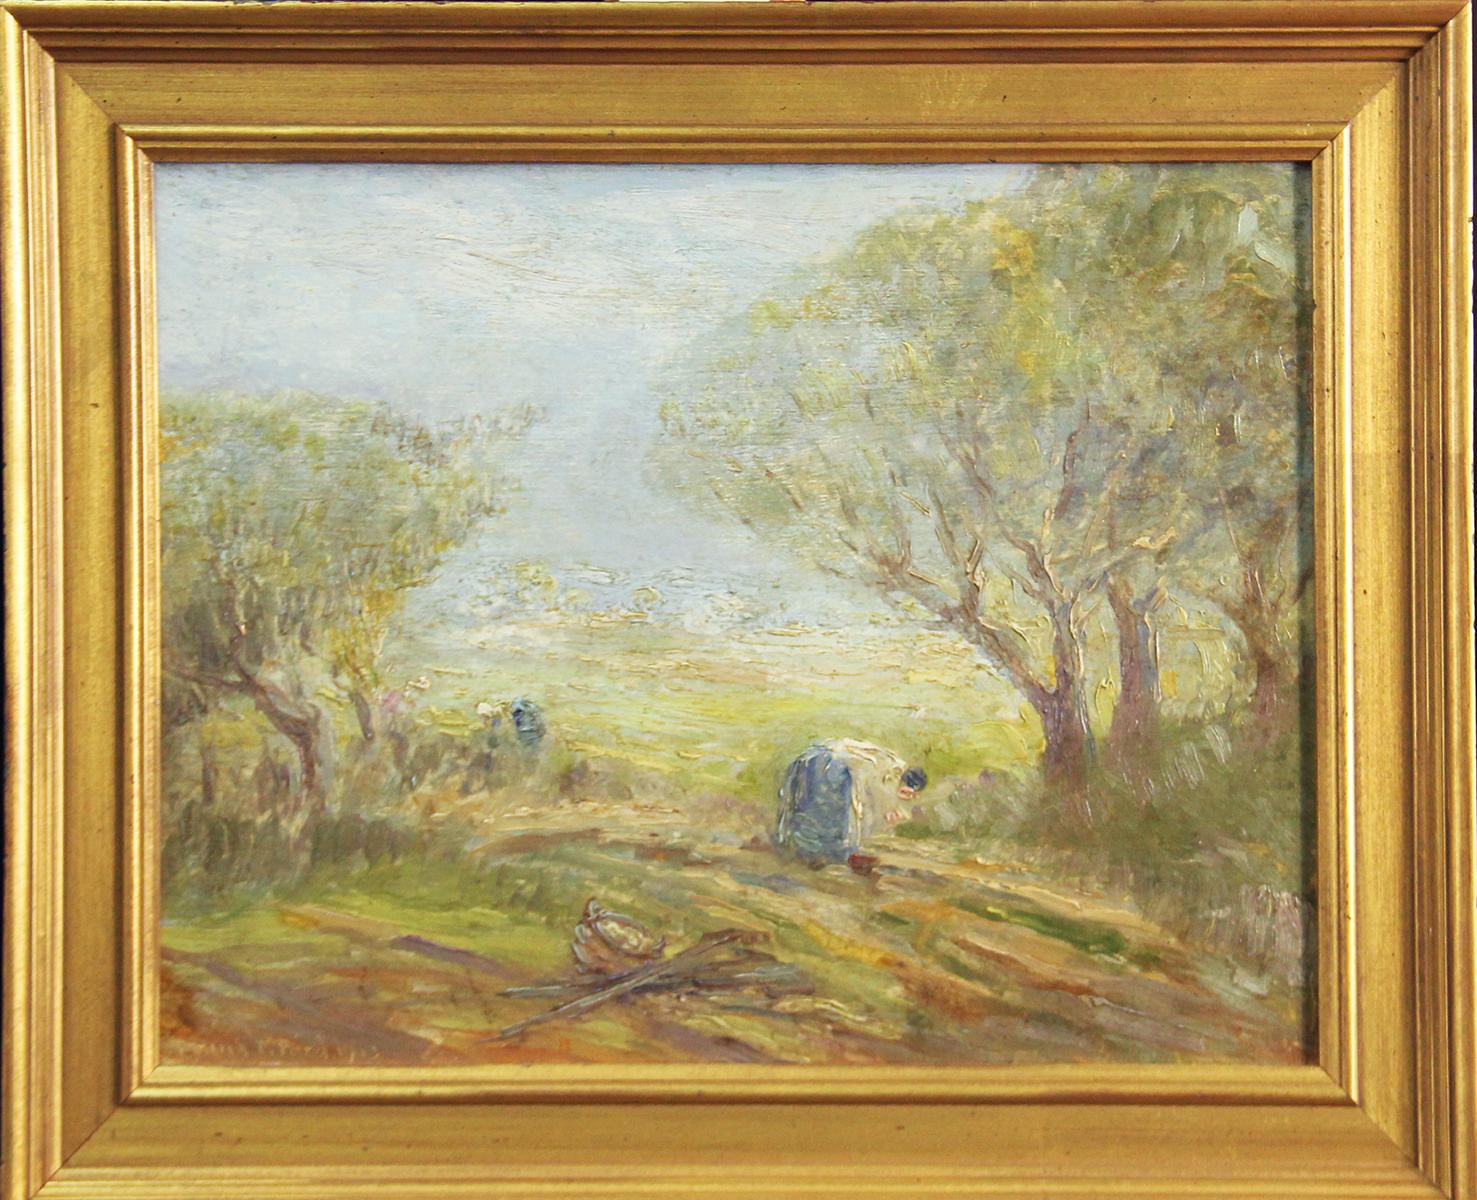 "In the Field, Spring" by Frank T. Ford is a 12" x 16" impressionist landscape painting of fieldworkers, dated 1913. It is oil on board, signed and dated "Frank T. Ford, 1913" in the lower left, and came from a private collection in Bethlehem,